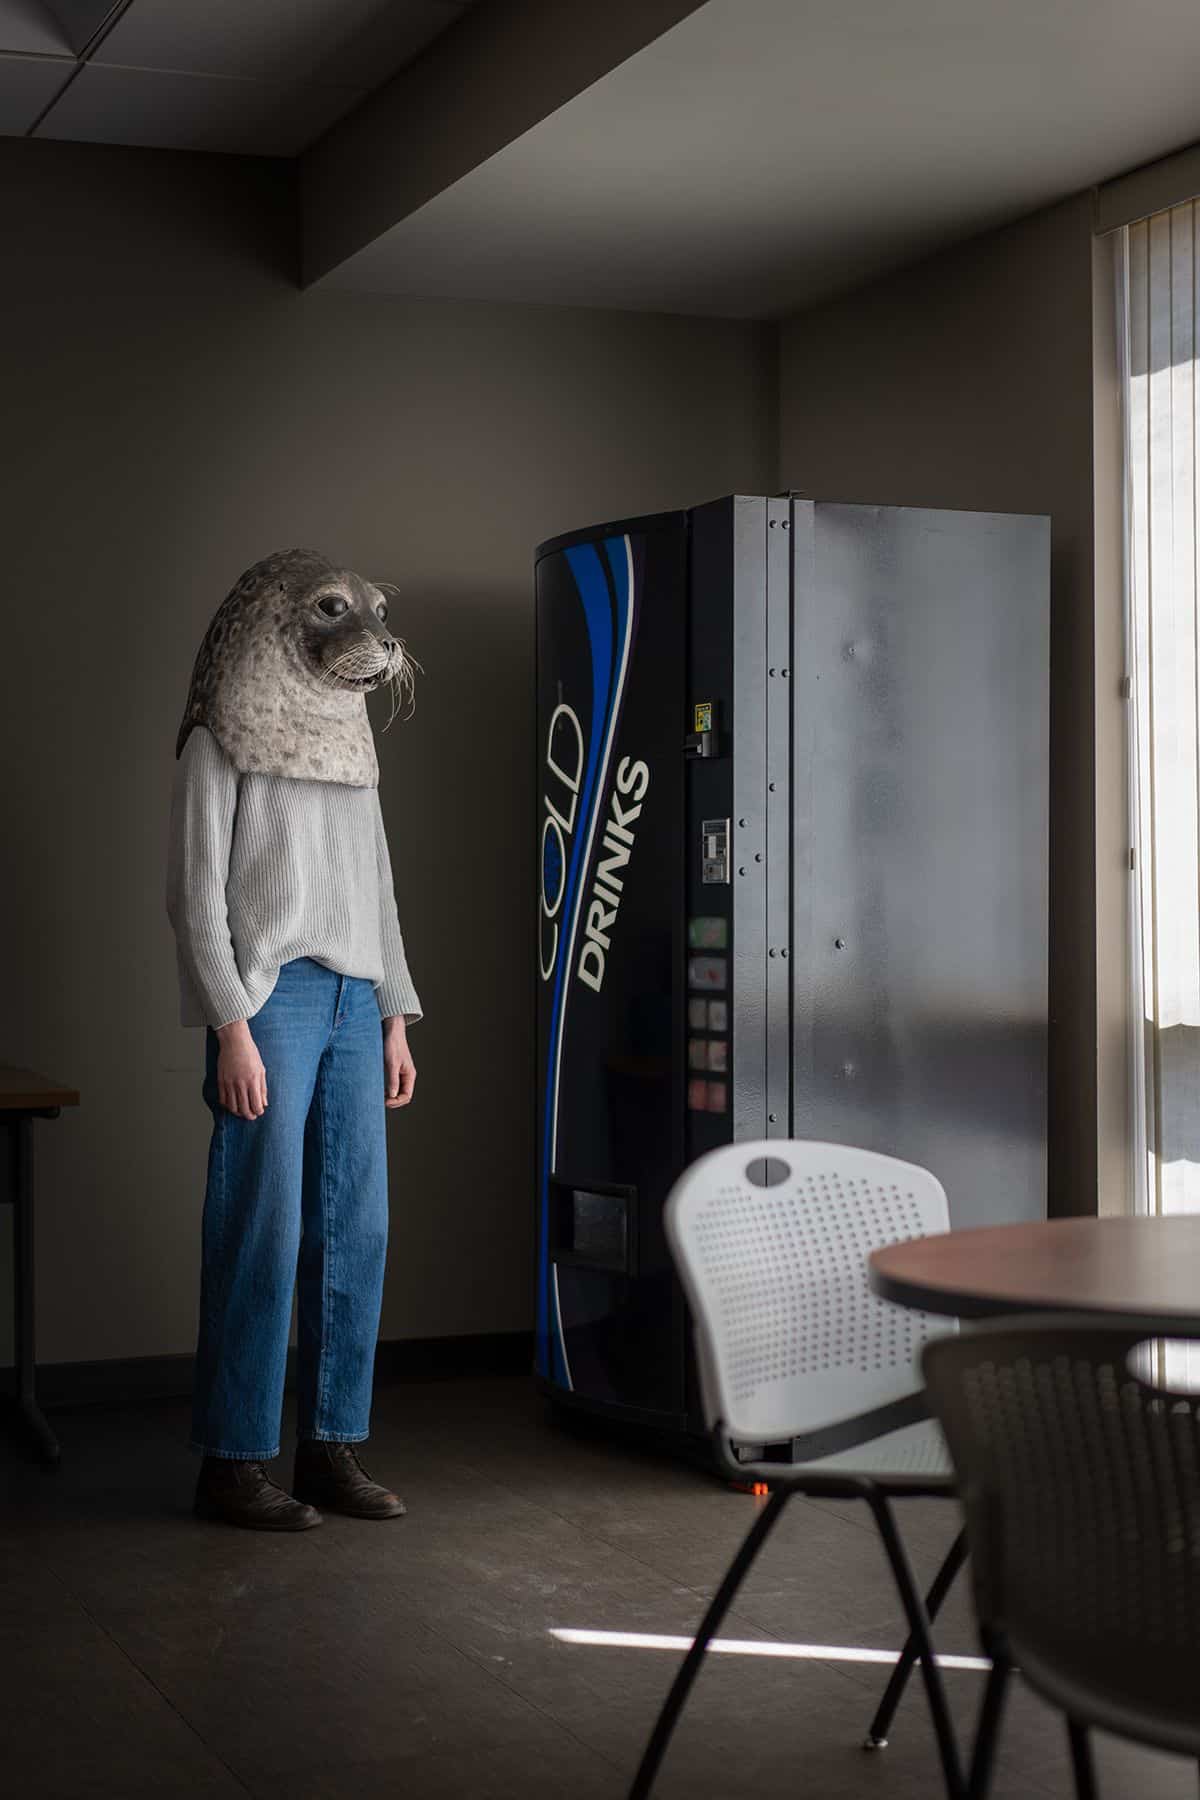 A person wearing a grey sweater and blue jeans standing next to an office vending machine while wearing a seal head over their head